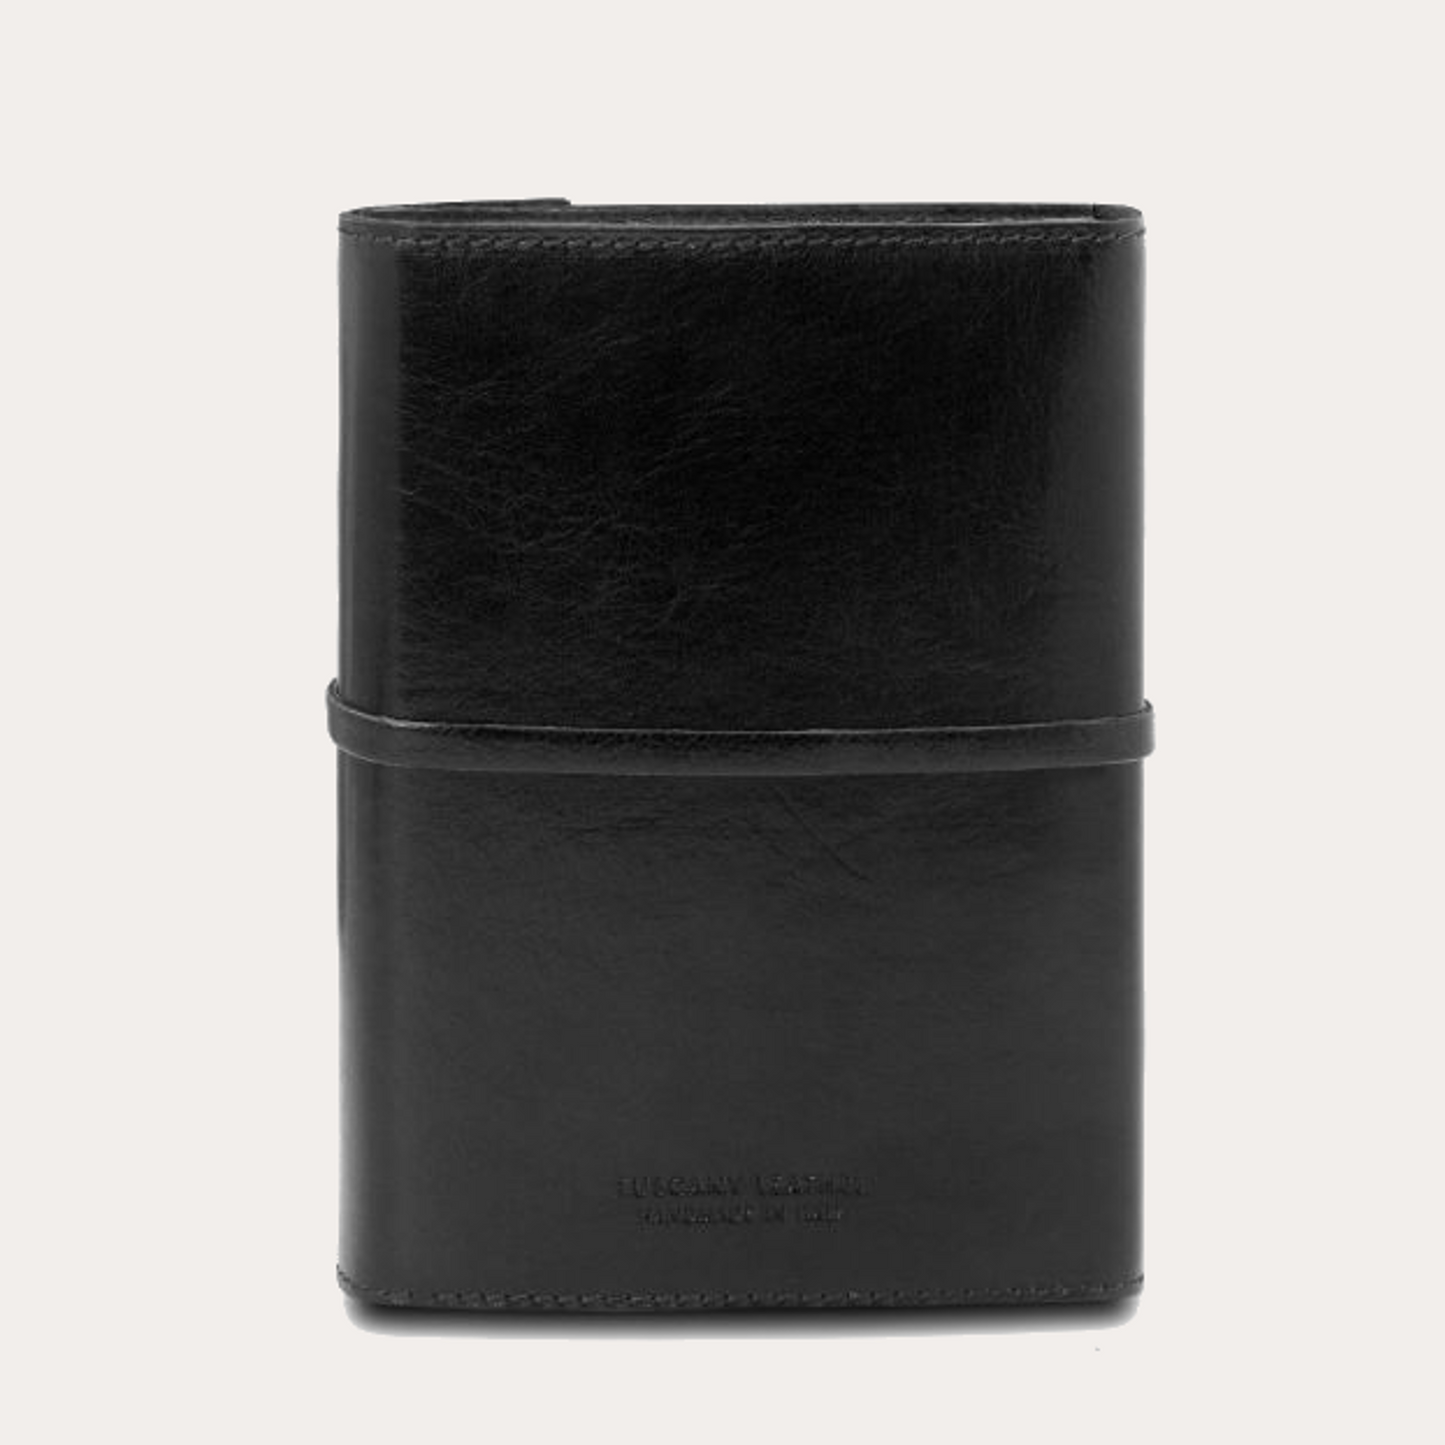 Tuscany Leather Black Leather Journal / Notebook